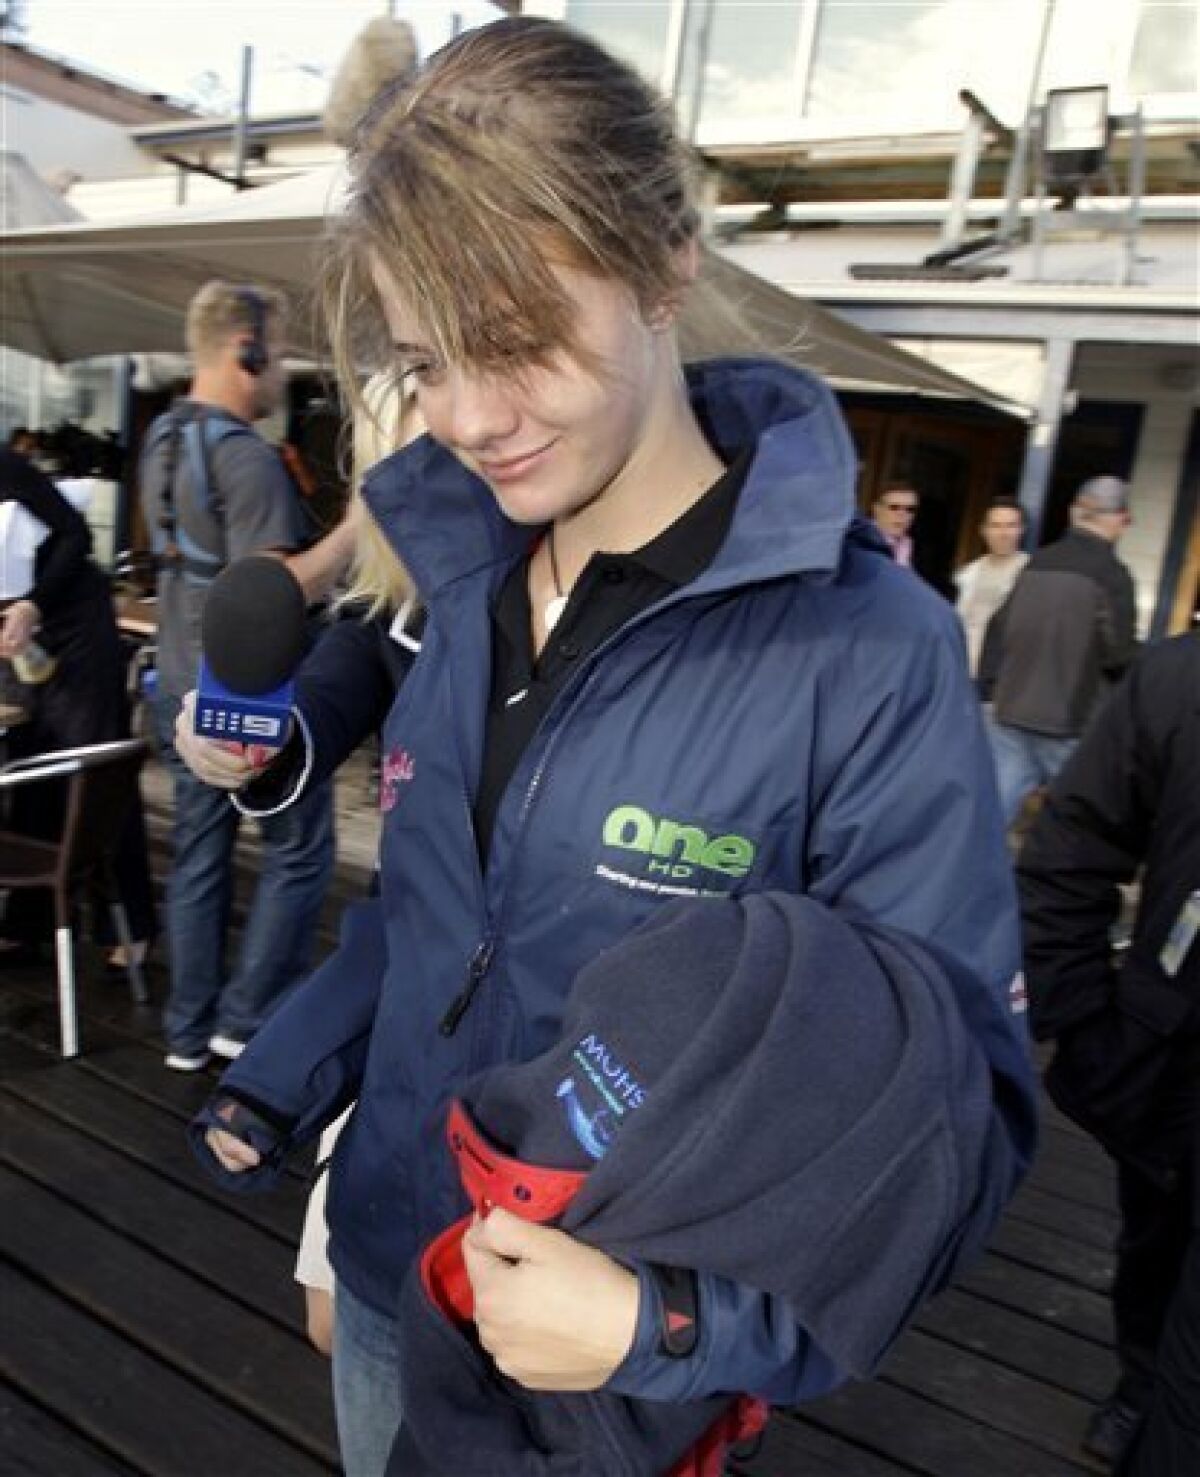 In this file photo from Oct. 18, 2009, teenage sailor Jessica Watson walks to her boat after her final shower on land as she prepares to depart Sydney on her boat Ella's Pink Lady in an attempt to become the youngest person to sail non-stop, solo and unassisted, around the world. Thousands are expected to line Sydney Harbour on Saturday, May 15, 2010, to offer a hero's welcome to 16-year-old Jessica Watson, who has battled 40-foot (12-meter) waves, multiple knockdowns and critics who called her too immature and inexperienced for the treacherous journey. (AP Photo/Rick Rycroft, File)